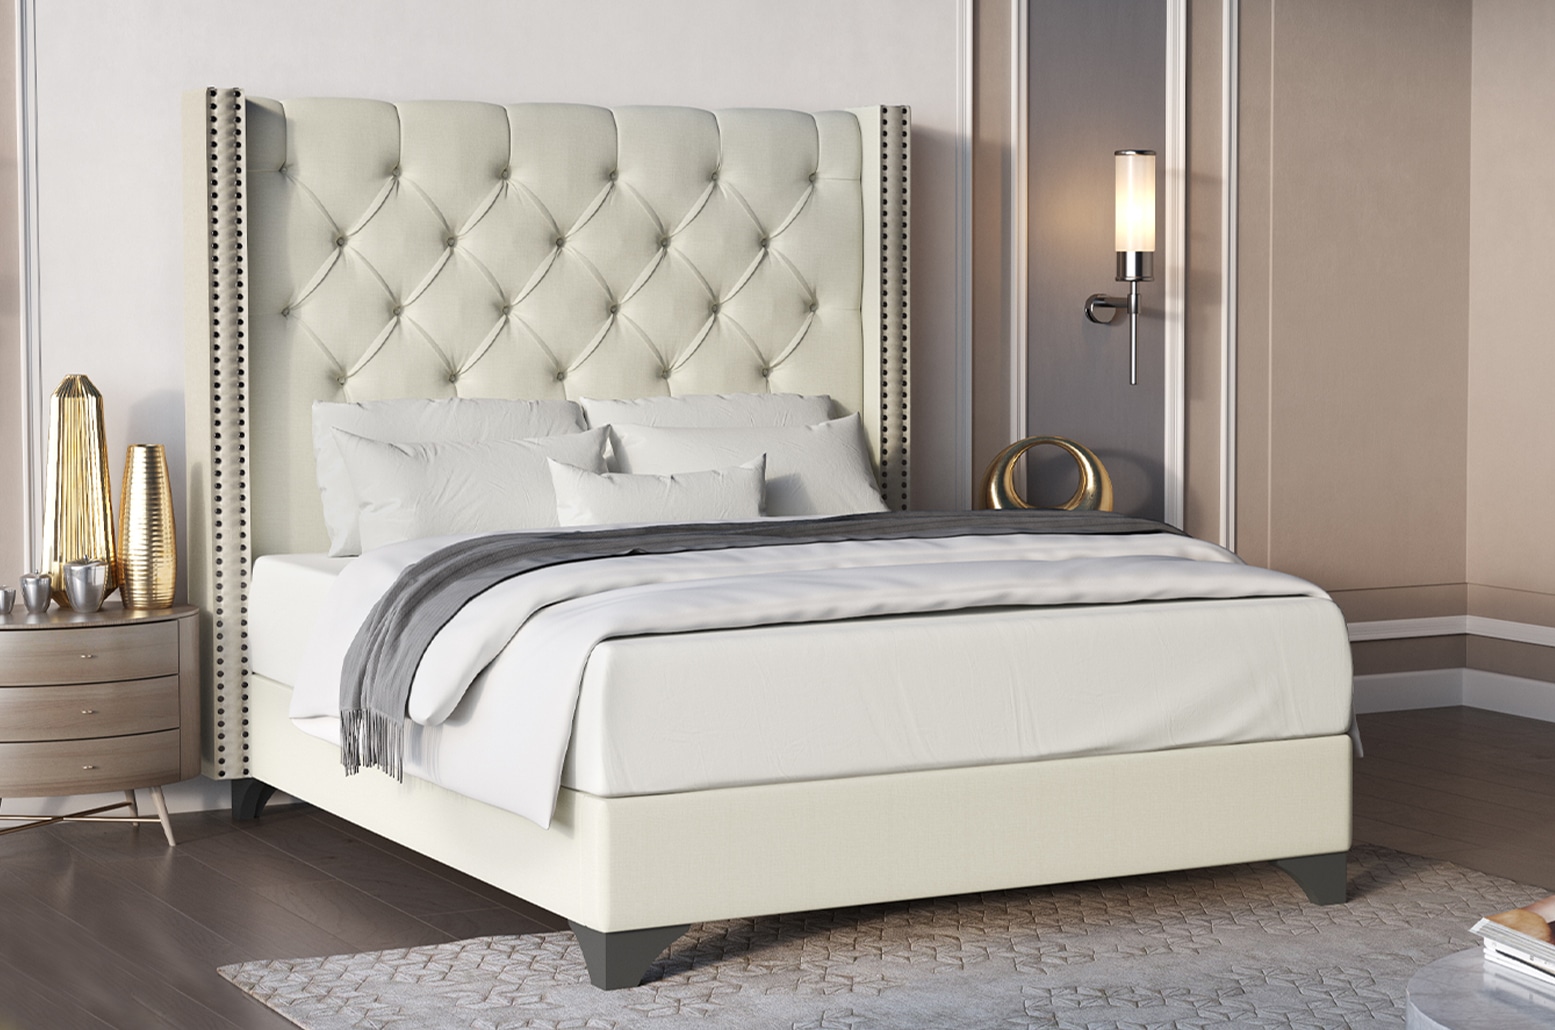 Lydia bed range with Hush Bedrooms